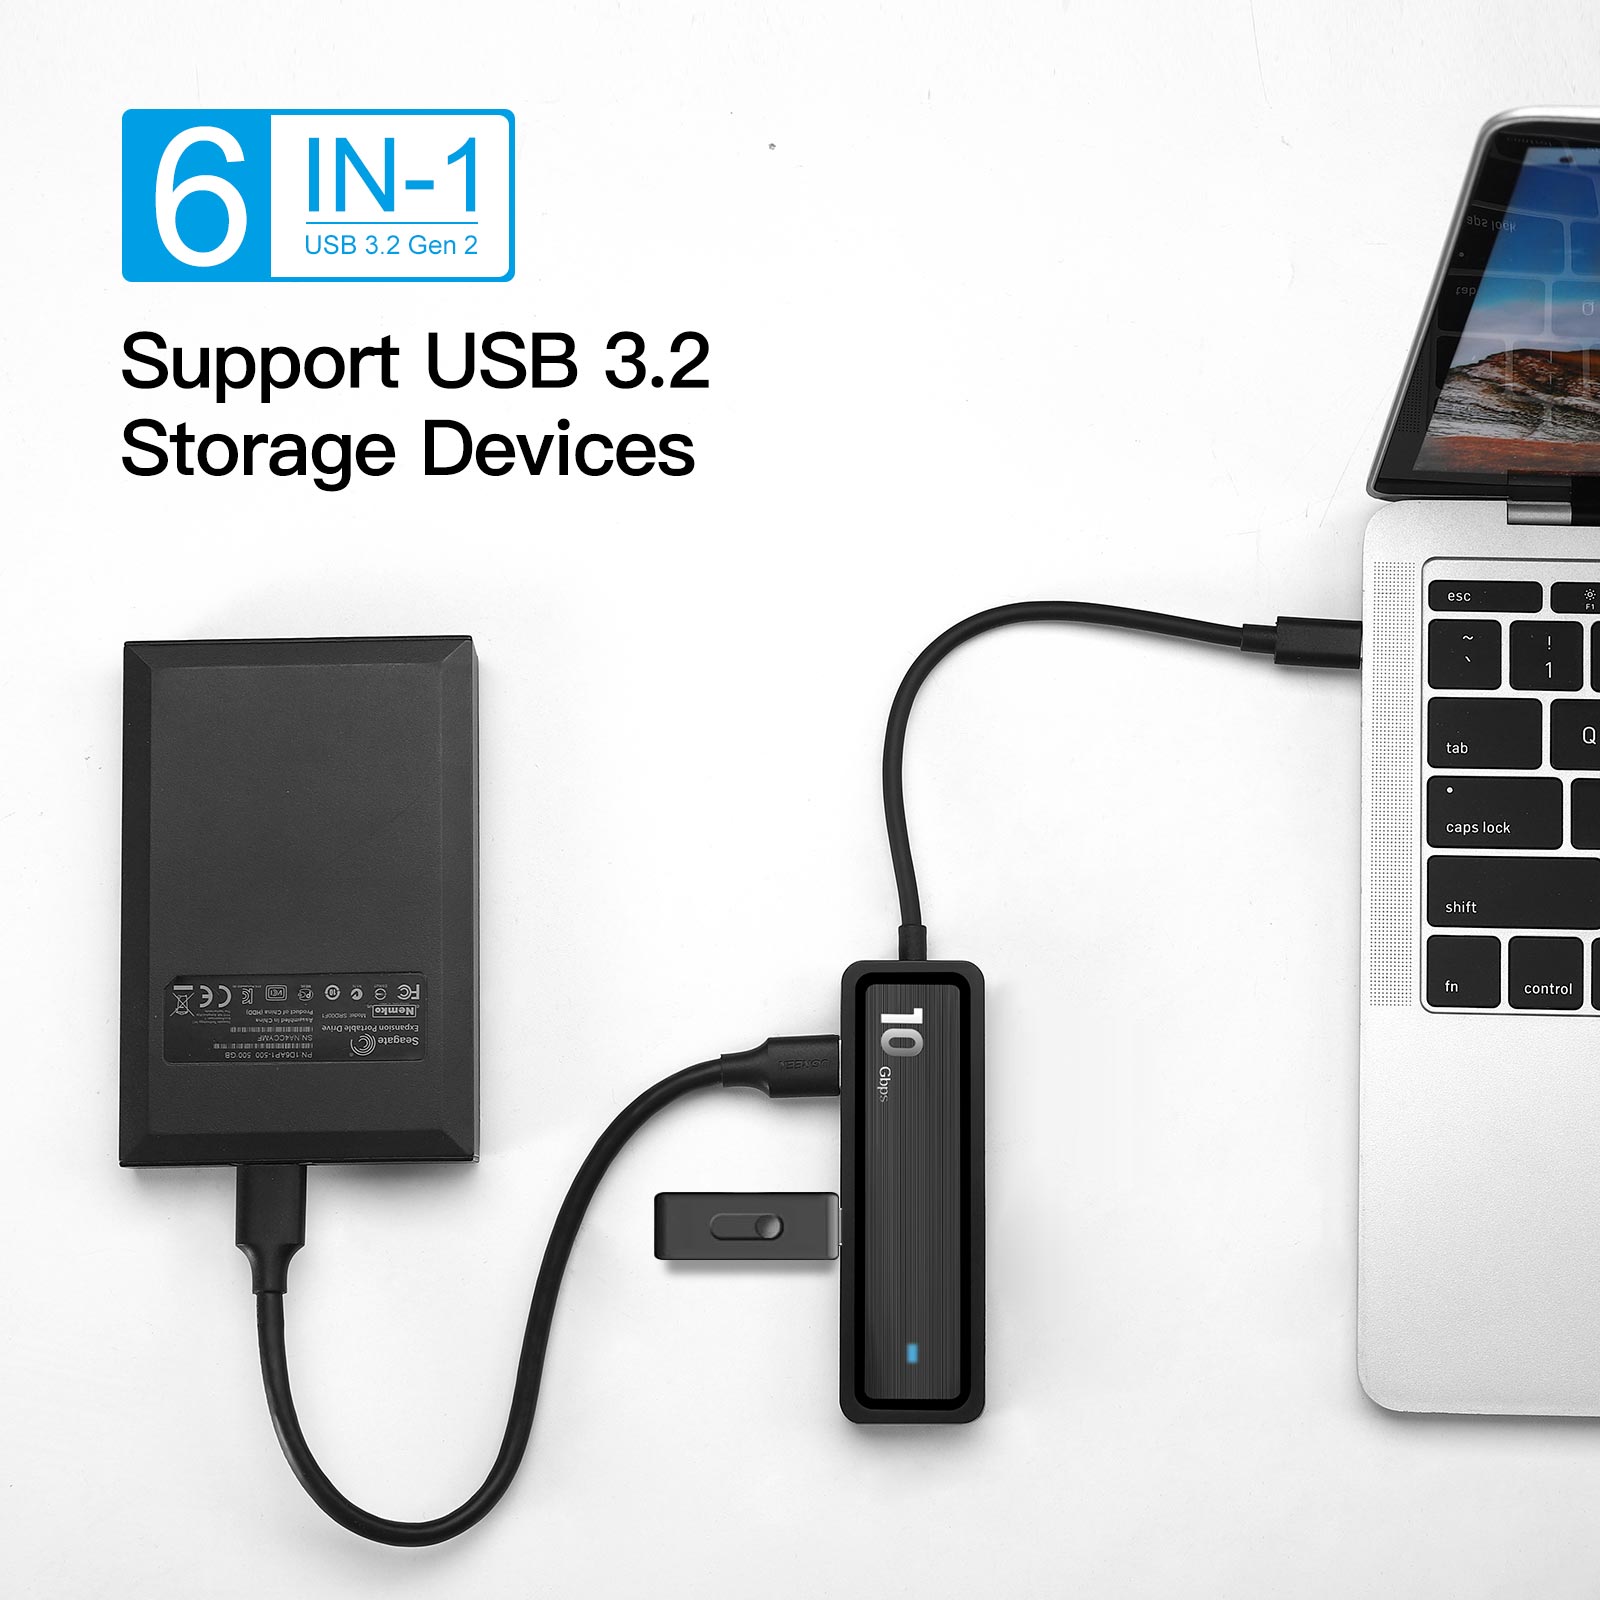 Pinrui-6-in-1-USB-Hub-4-Port-USB31-Gen-2-Expander-with-SD-TF-Adapter-Laptop-Docking-Station-1951382-4